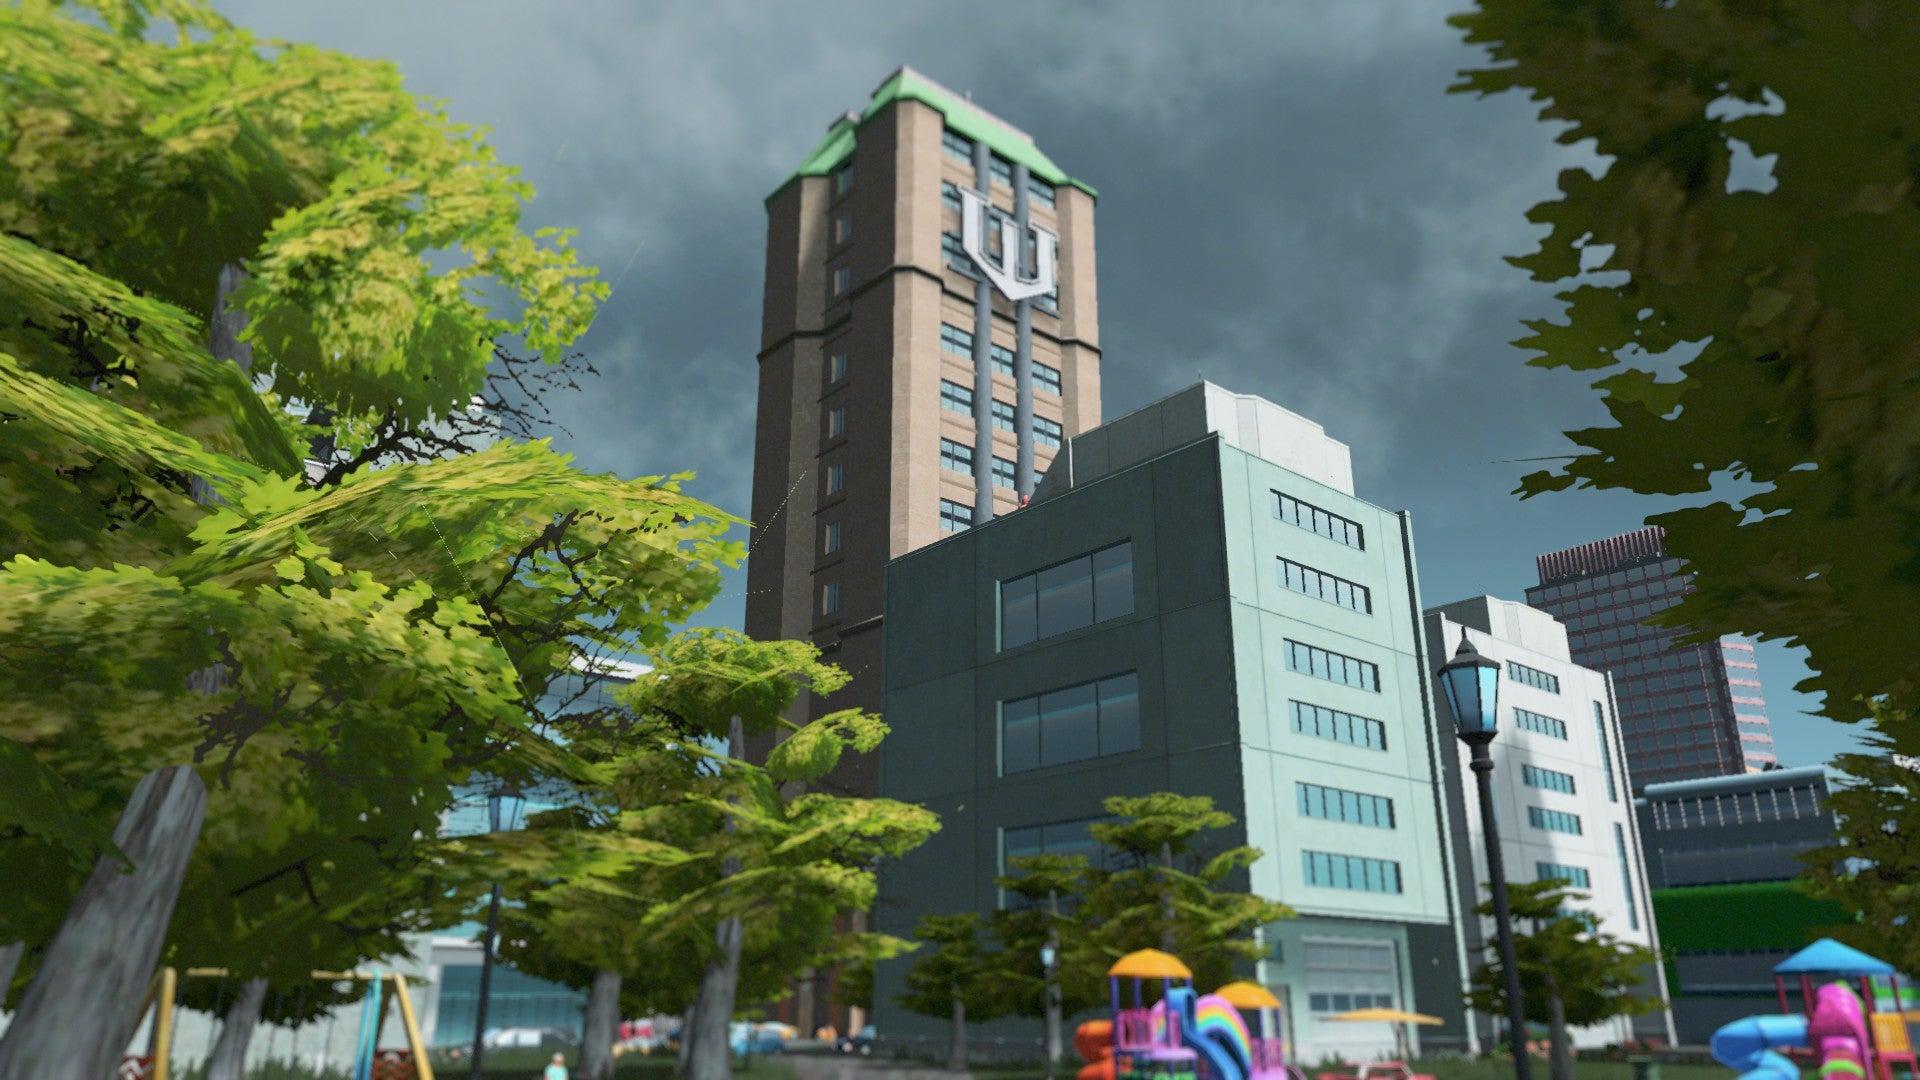 Image for Cities: Skylines players should check out Nakatomi Plaza and Wayne Enterprises  